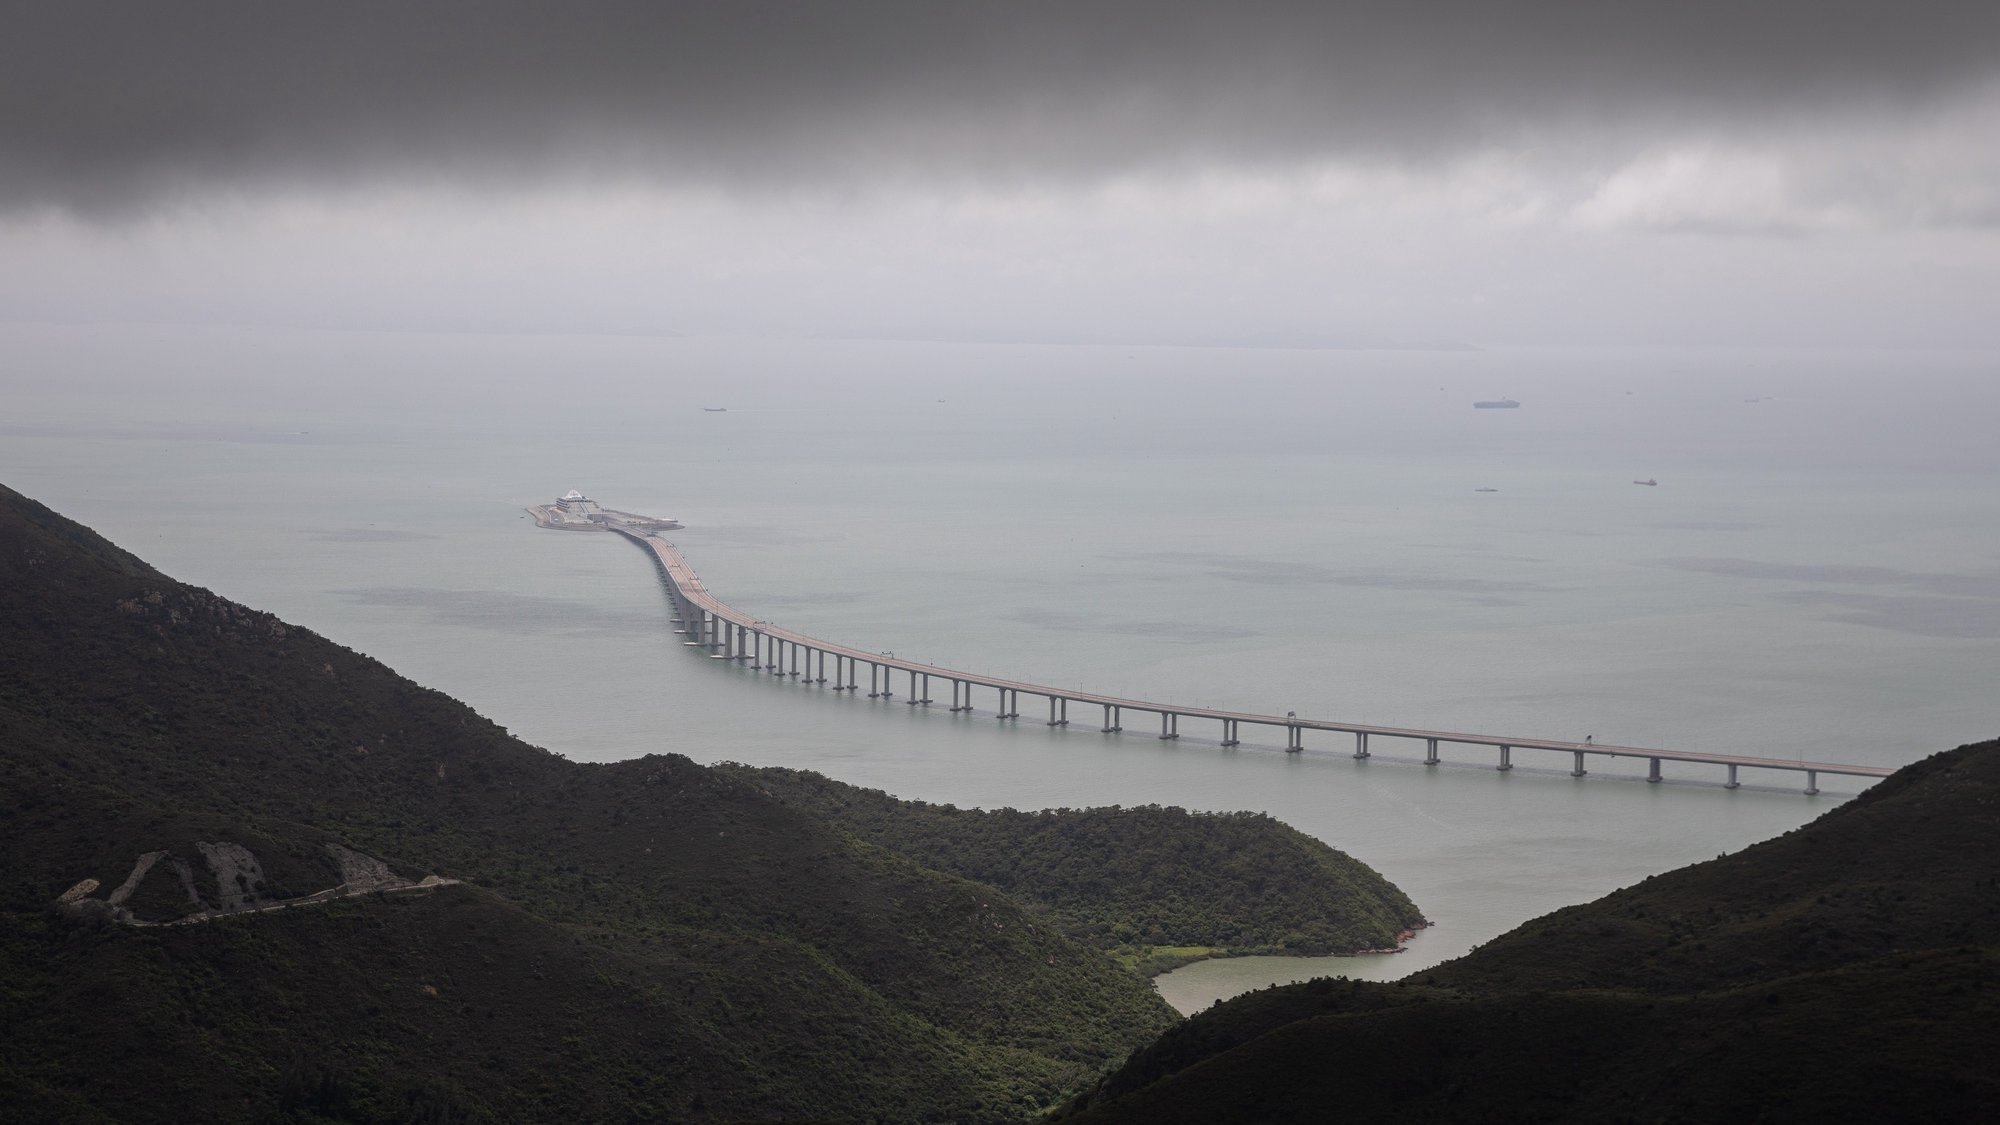 epa09269619 The Hong Kong Link Road of the Hong Kong-Zhuhai-Macau Bridge, (HZMB) spans over the South China Sea in Hong Kong, China, 14 June 2021. The HZMB is 55-kilometre long and consists of a series of bridges, an undersea tunnel and four artificial islands connecting Hong Kong, Macau and Zhuhai in China.  EPA/JEROME FAVRE